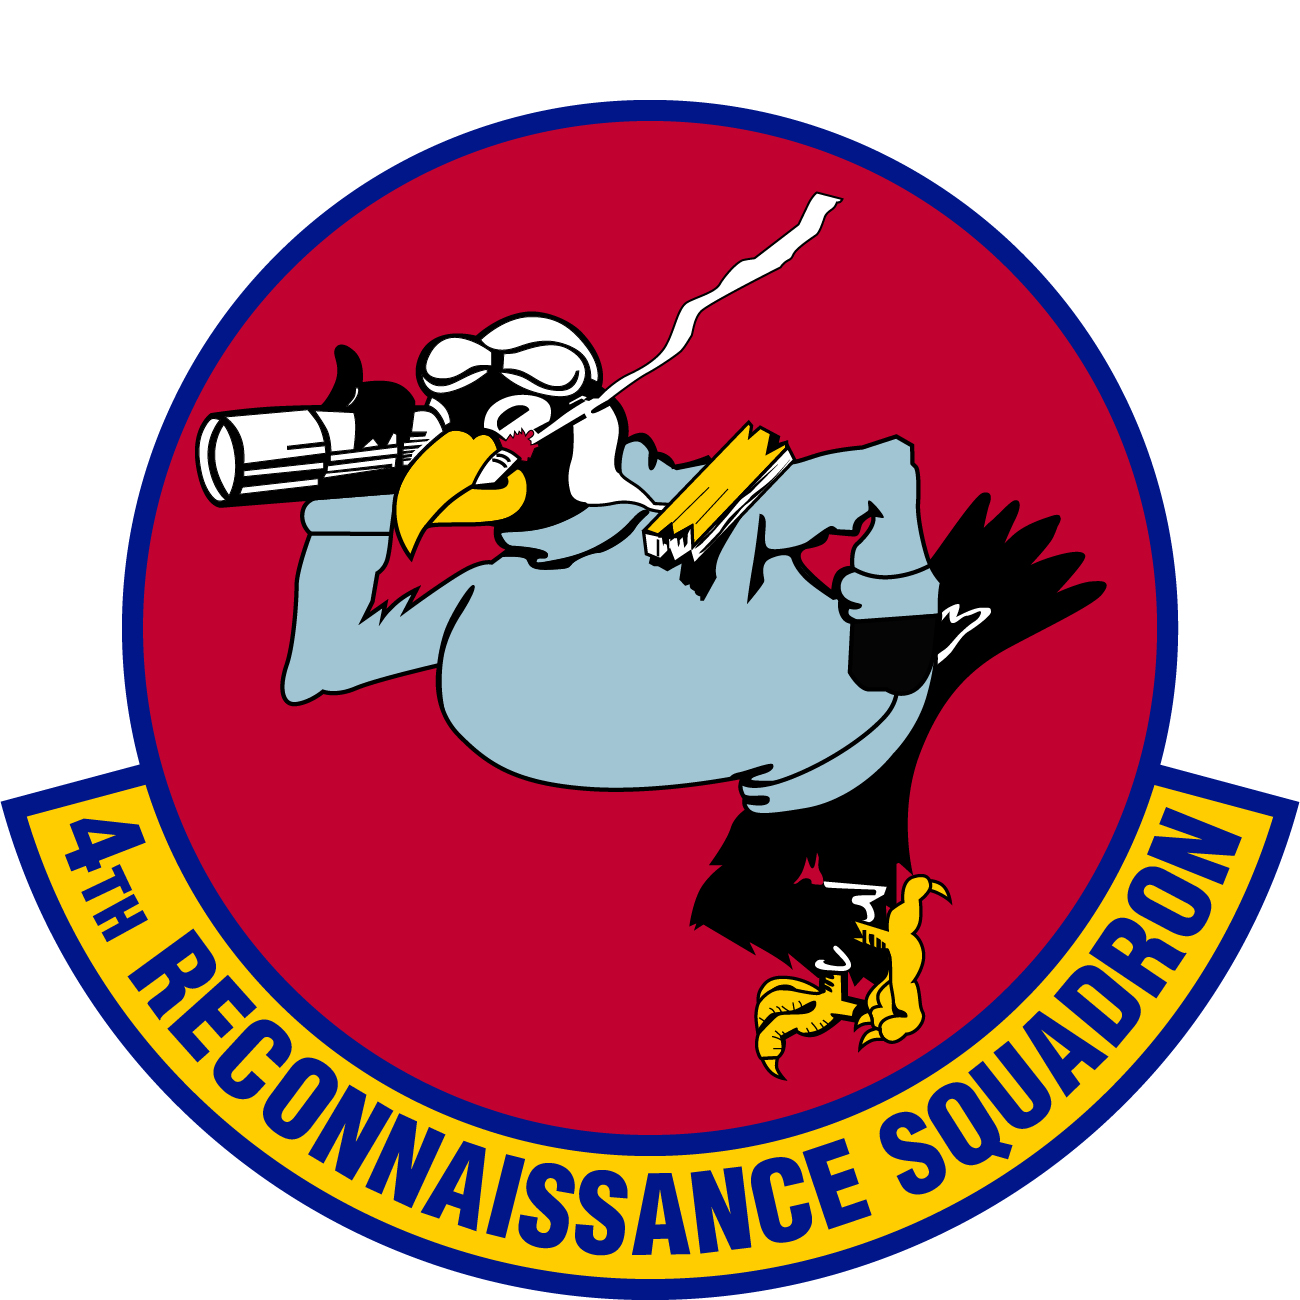 This is an image of the 4th Reconnaissance Squadron's seal.